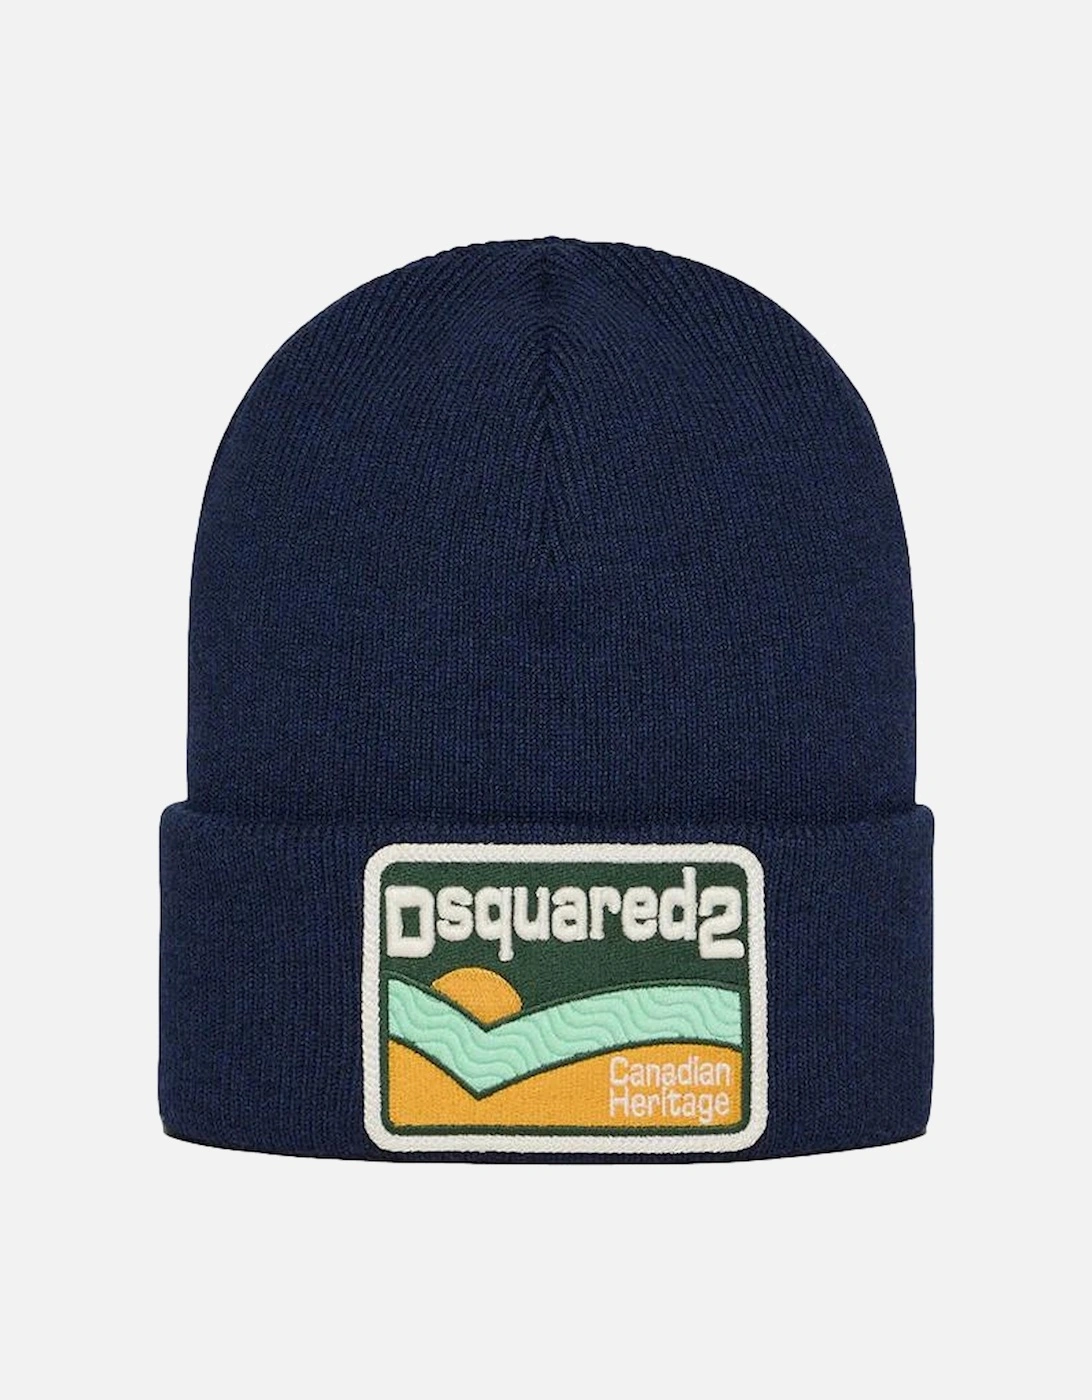 Canadian Heritage Beanie in Navy Blue, 4 of 3